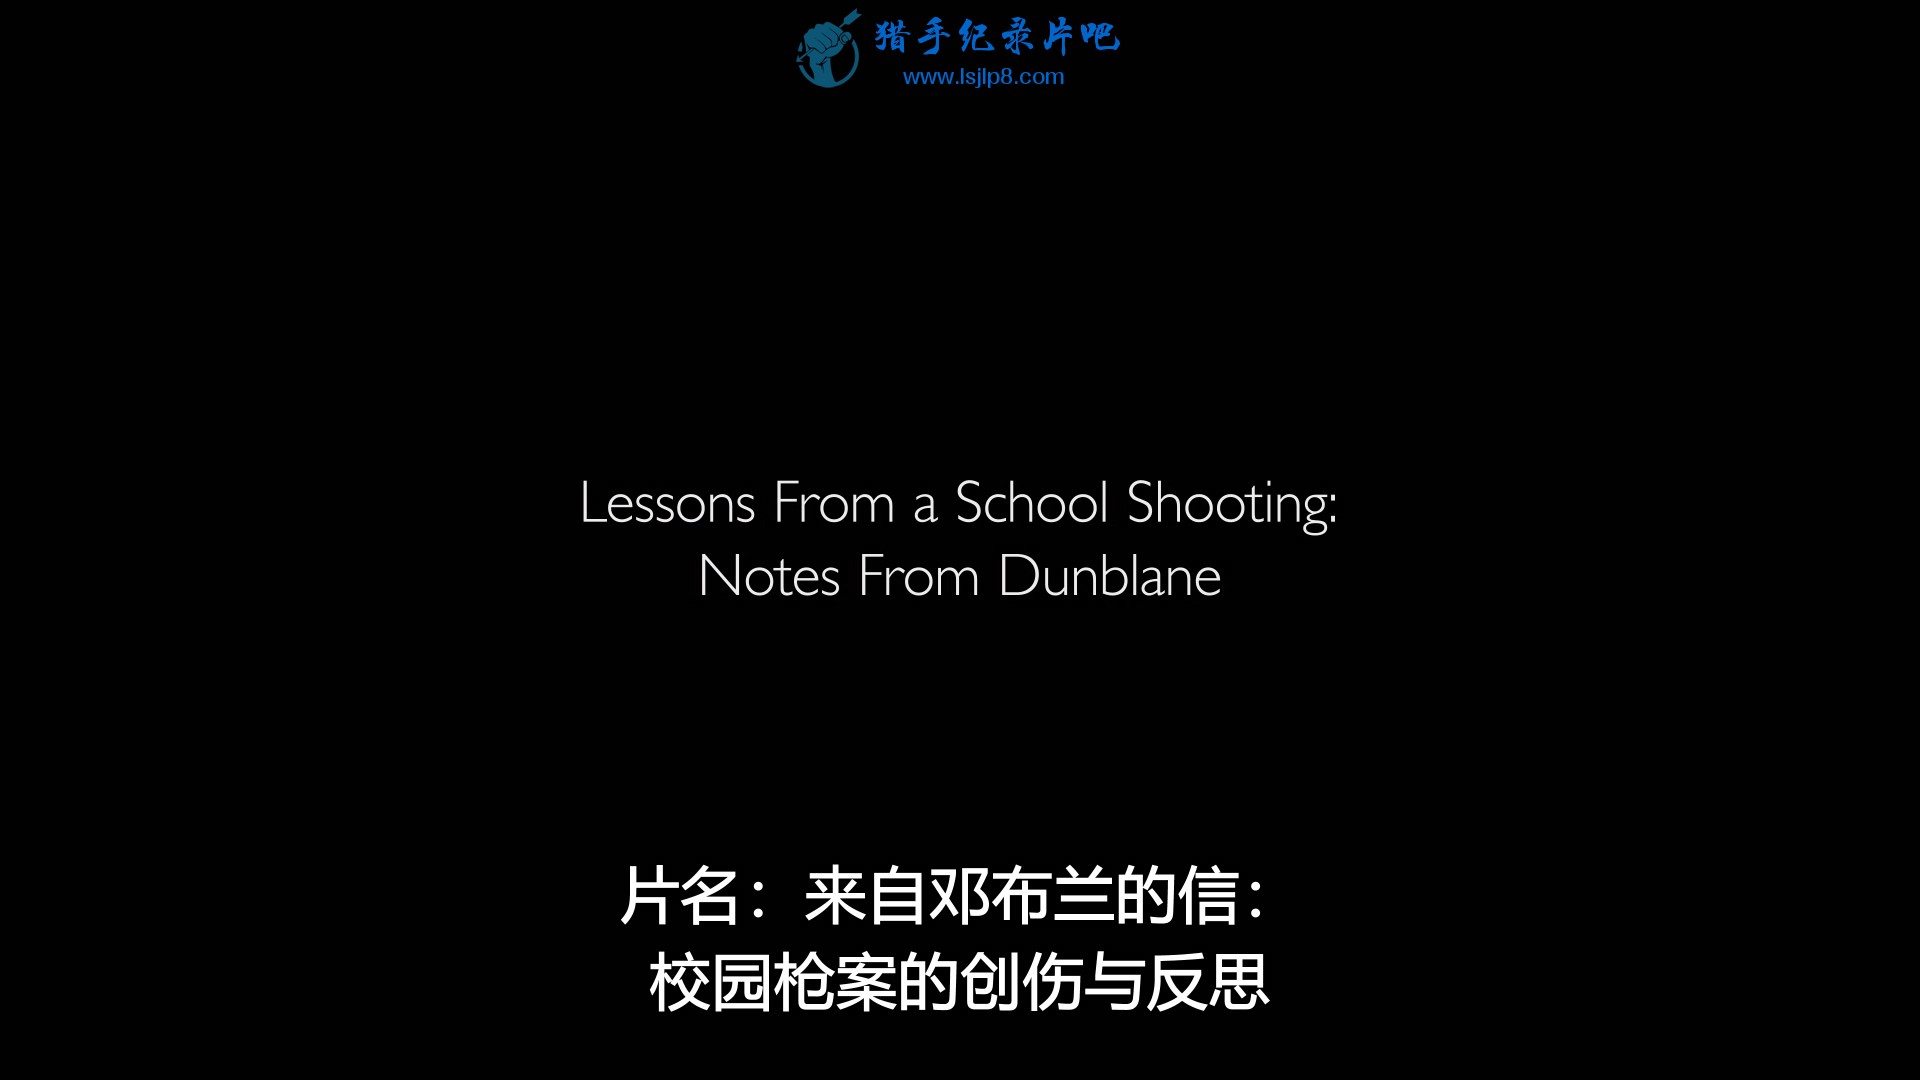 Lessons From a School Shooting - Notes From Dunblane (2018) 1080p Netflix WEB-DL.jpg